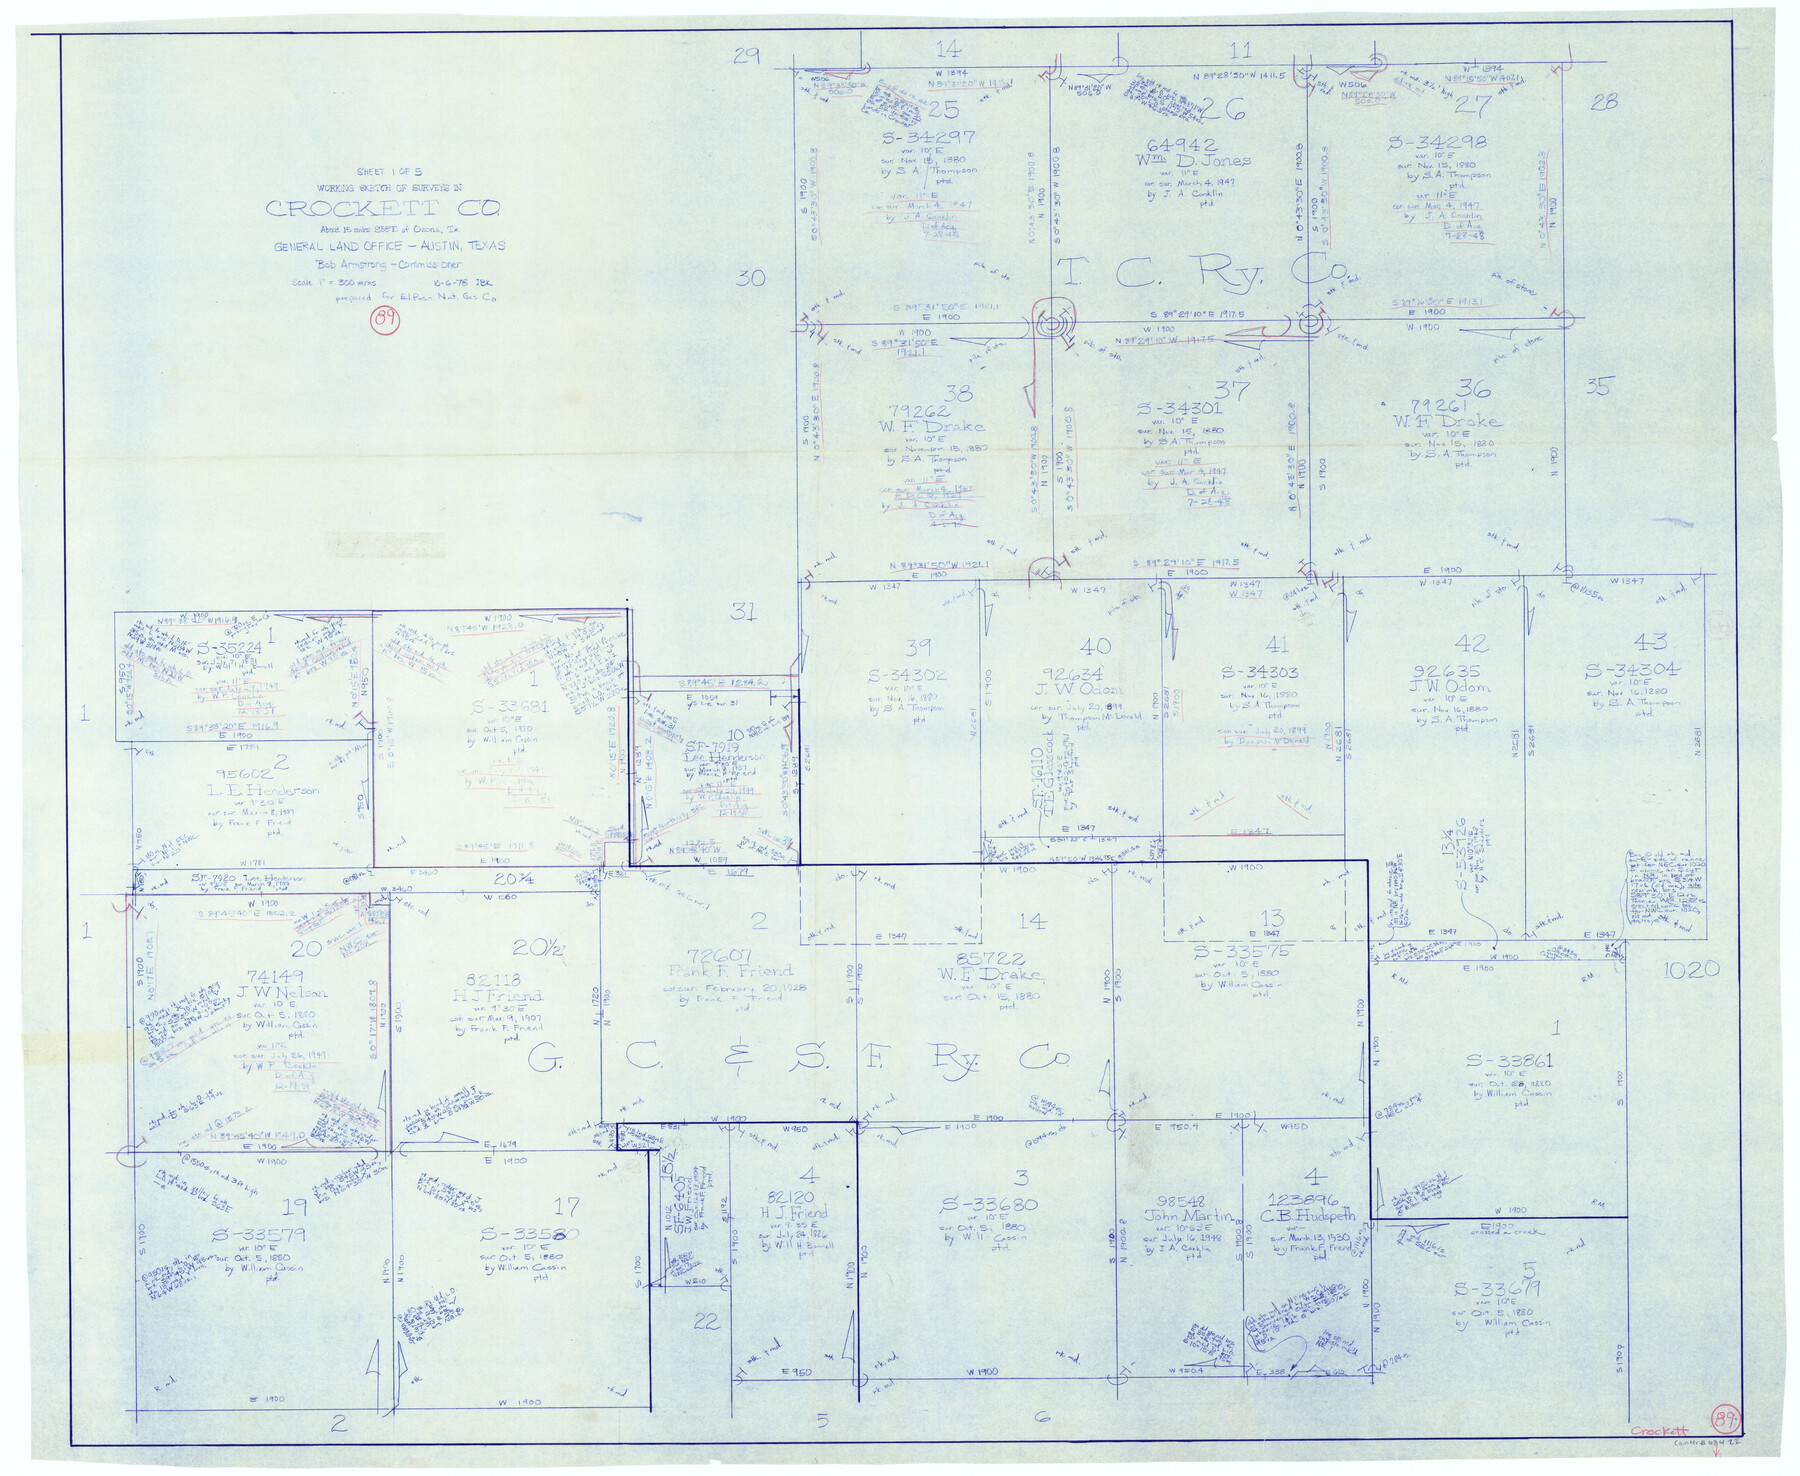 68422, Crockett County Working Sketch 89, General Map Collection